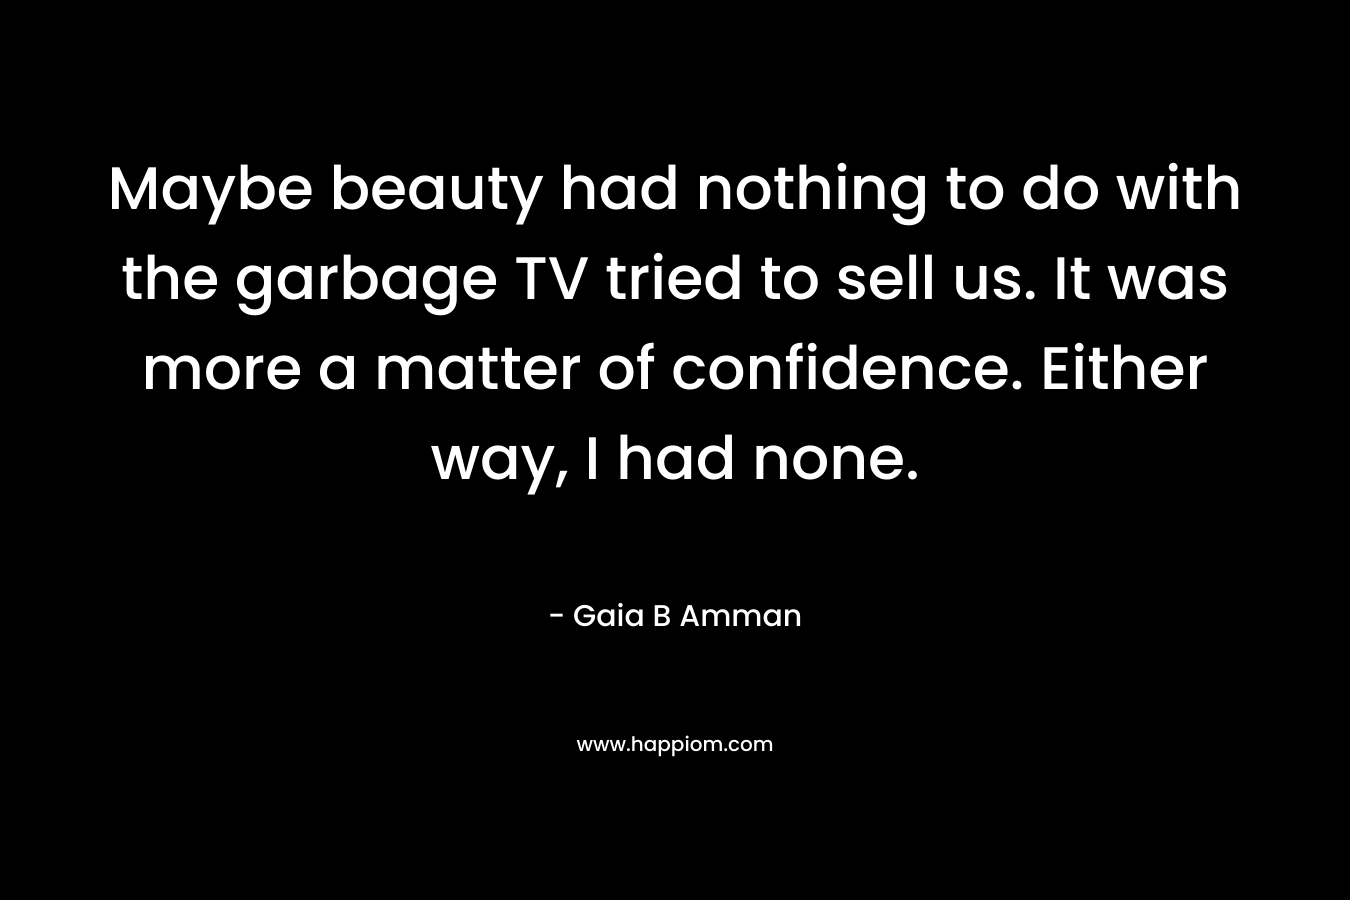 Maybe beauty had nothing to do with the garbage TV tried to sell us. It was more a matter of confidence. Either way, I had none.